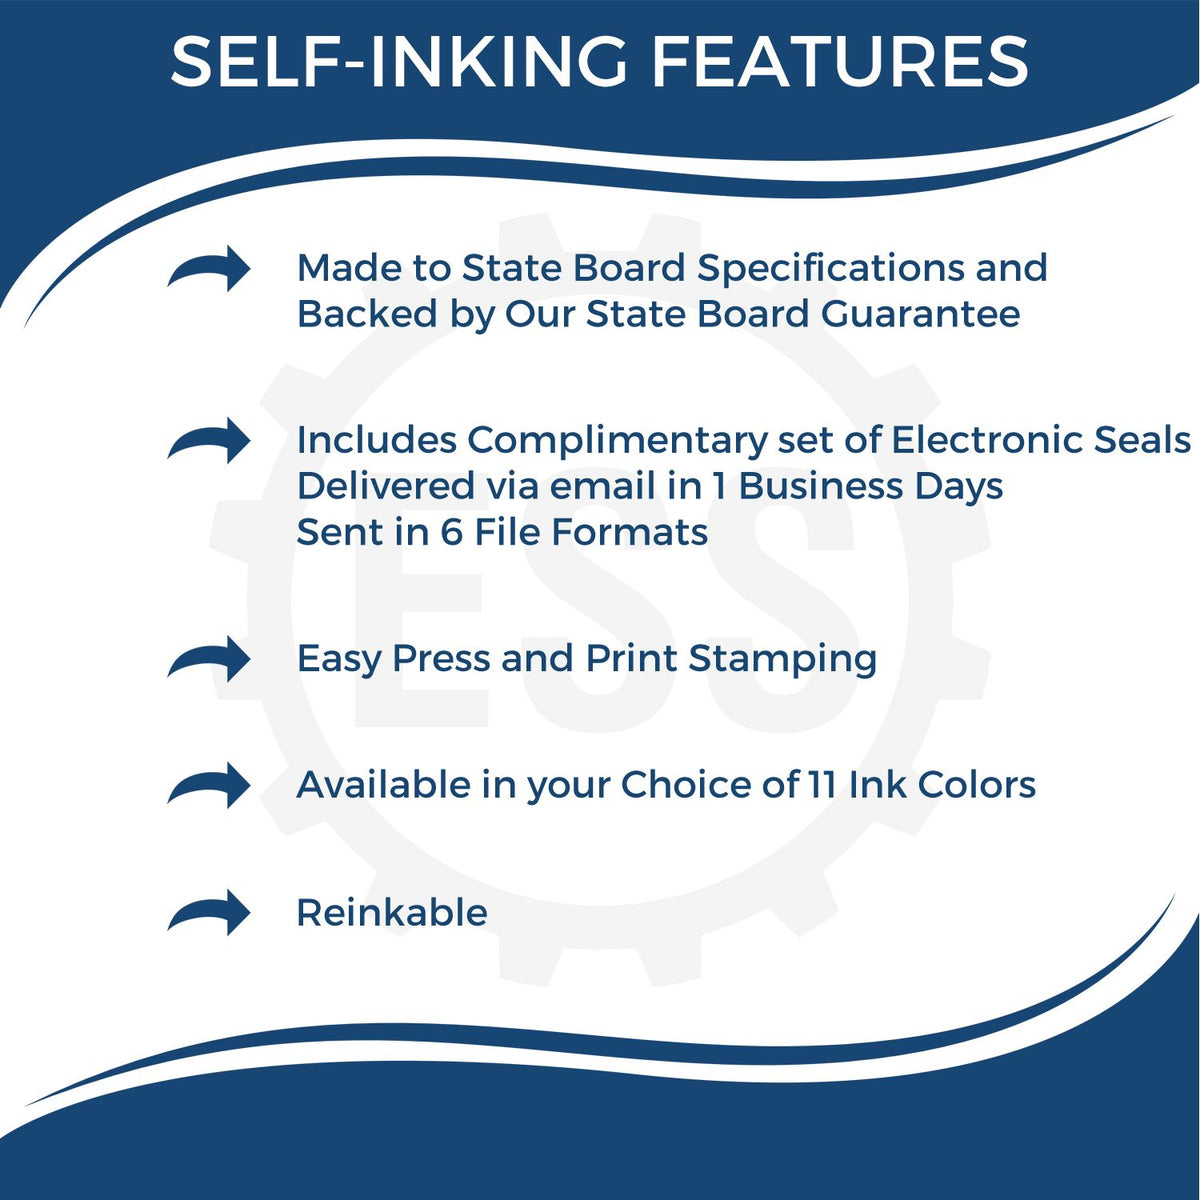 A picture of an infographic highlighting the selling points for the Self-Inking South Carolina Geologist Stamp